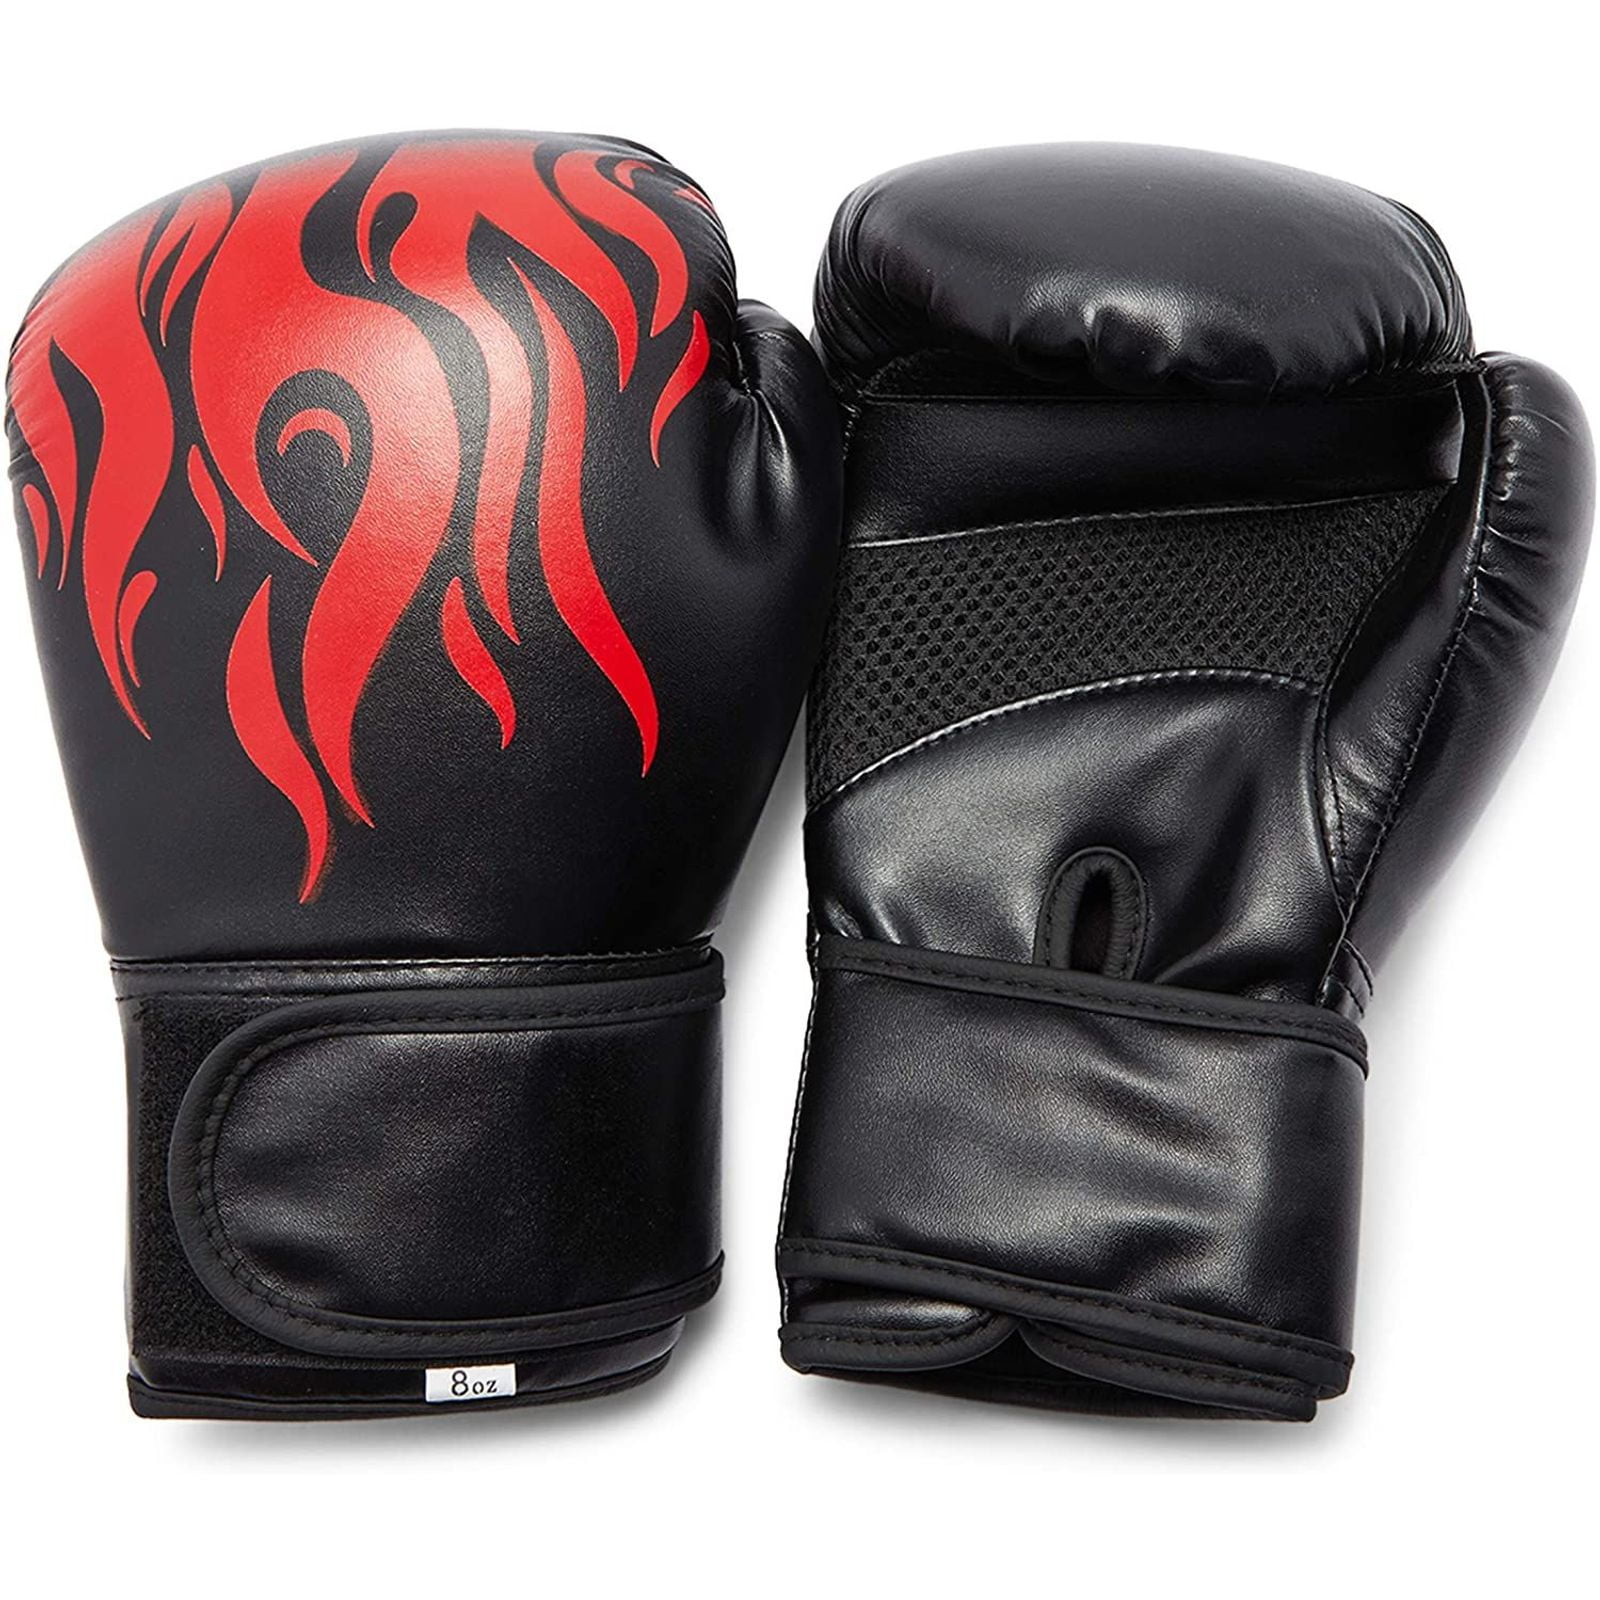 Inner Gloves Boxing Fist Hand Wraps Bandages MMA Dragon Punch Muay Thai Kick